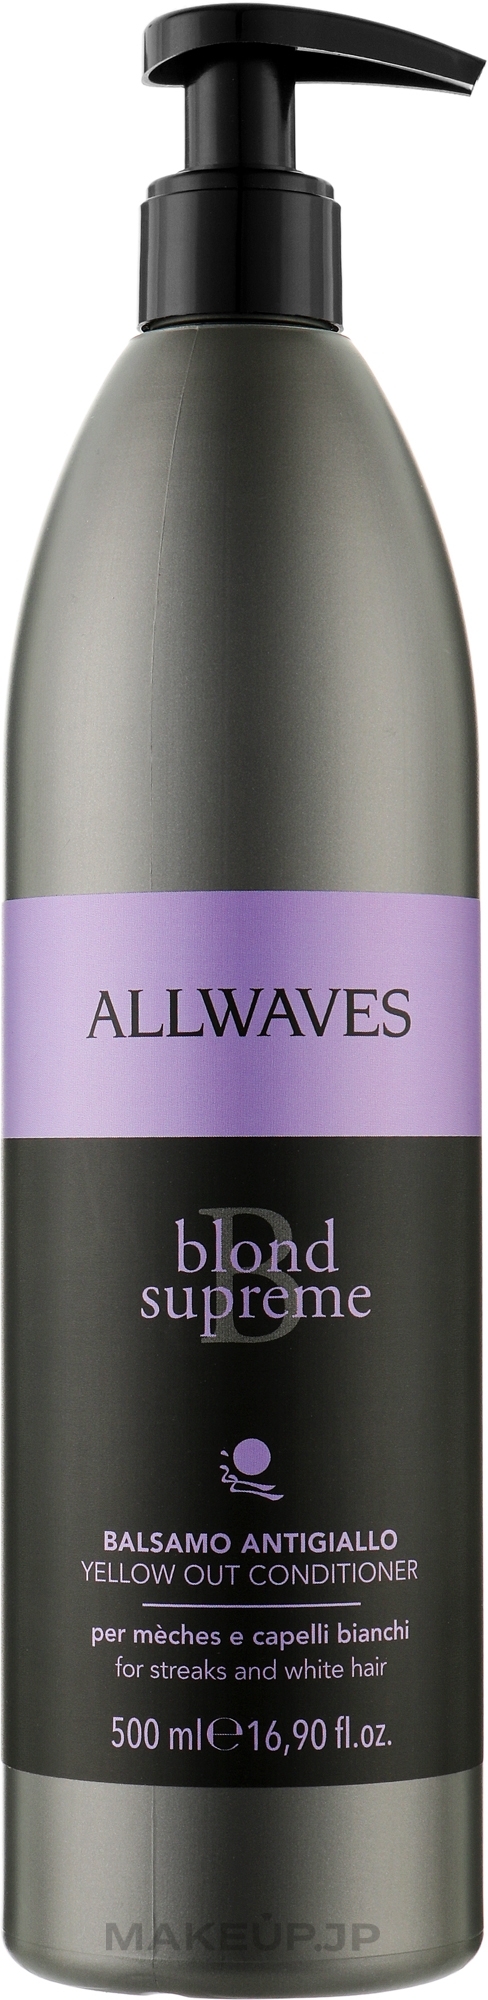 Allwaves - Blond Supreme, Yellow Out Conditioner — photo 500 ml